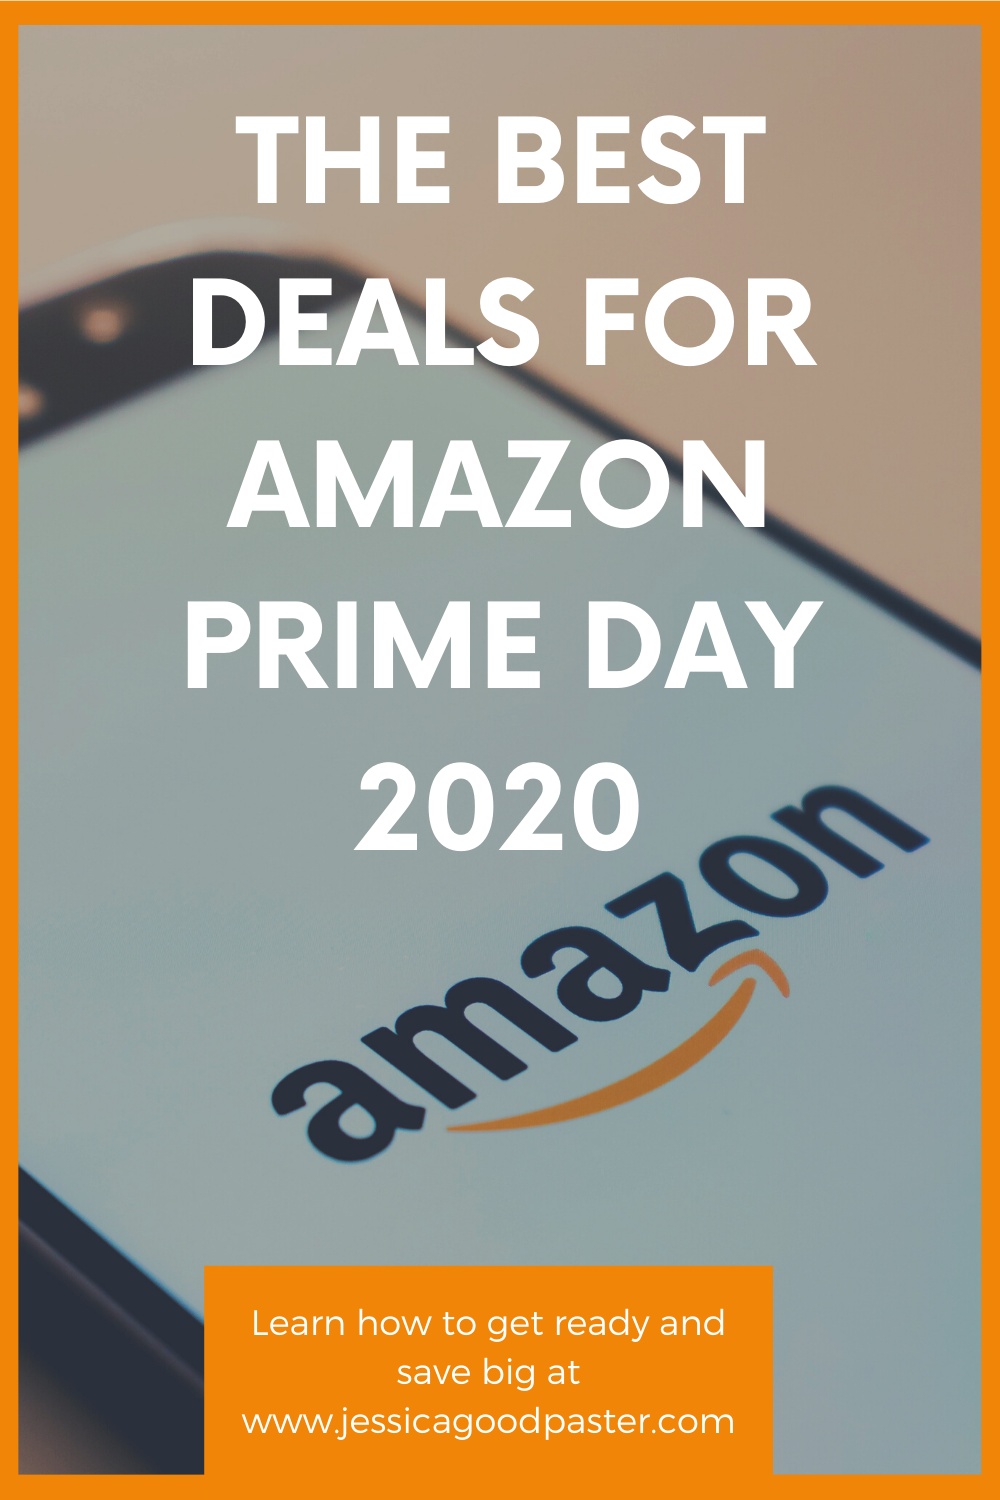 The Best Amazon Prime Day Deals 2020 | Learn how to get ready and save big on Amazon's biggest shopping day! Get huge savings on toys, electronics, clothes, gifts, computers, and more with Prime Day 2020. The epic day is October 13, but there will be early Prime deals and tons of savings leading up to the main event. #amazon #primeday #primeday2020 #deals #giftideas 